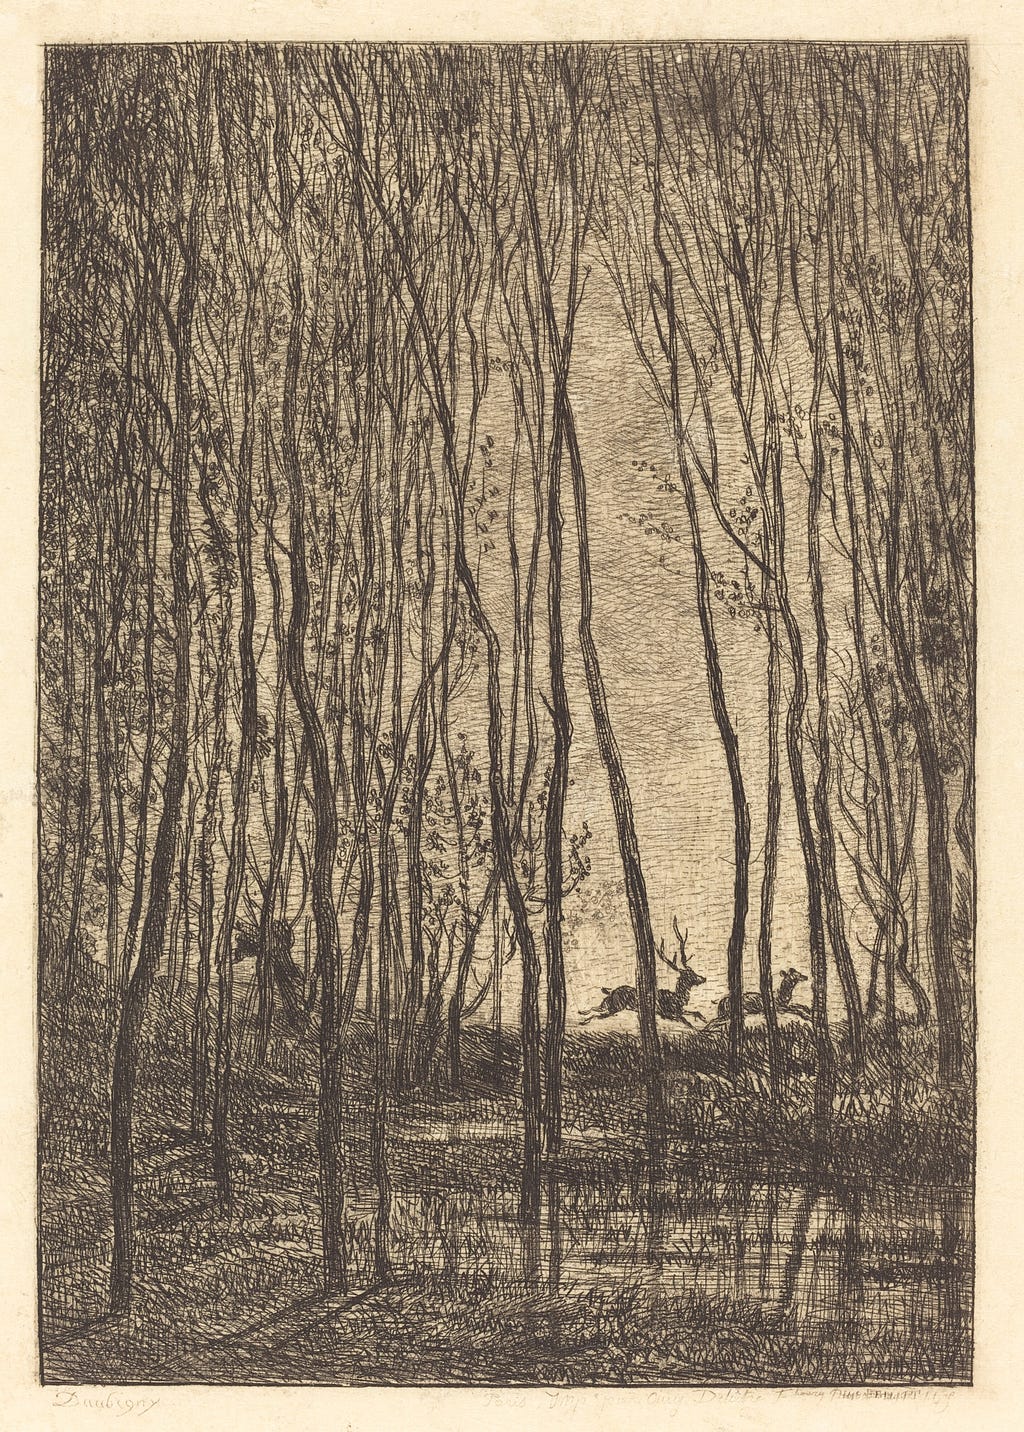 an etched drawing that is a silhoutted scene of two deer, one male one female, running through a forest of thin, spindly trees.